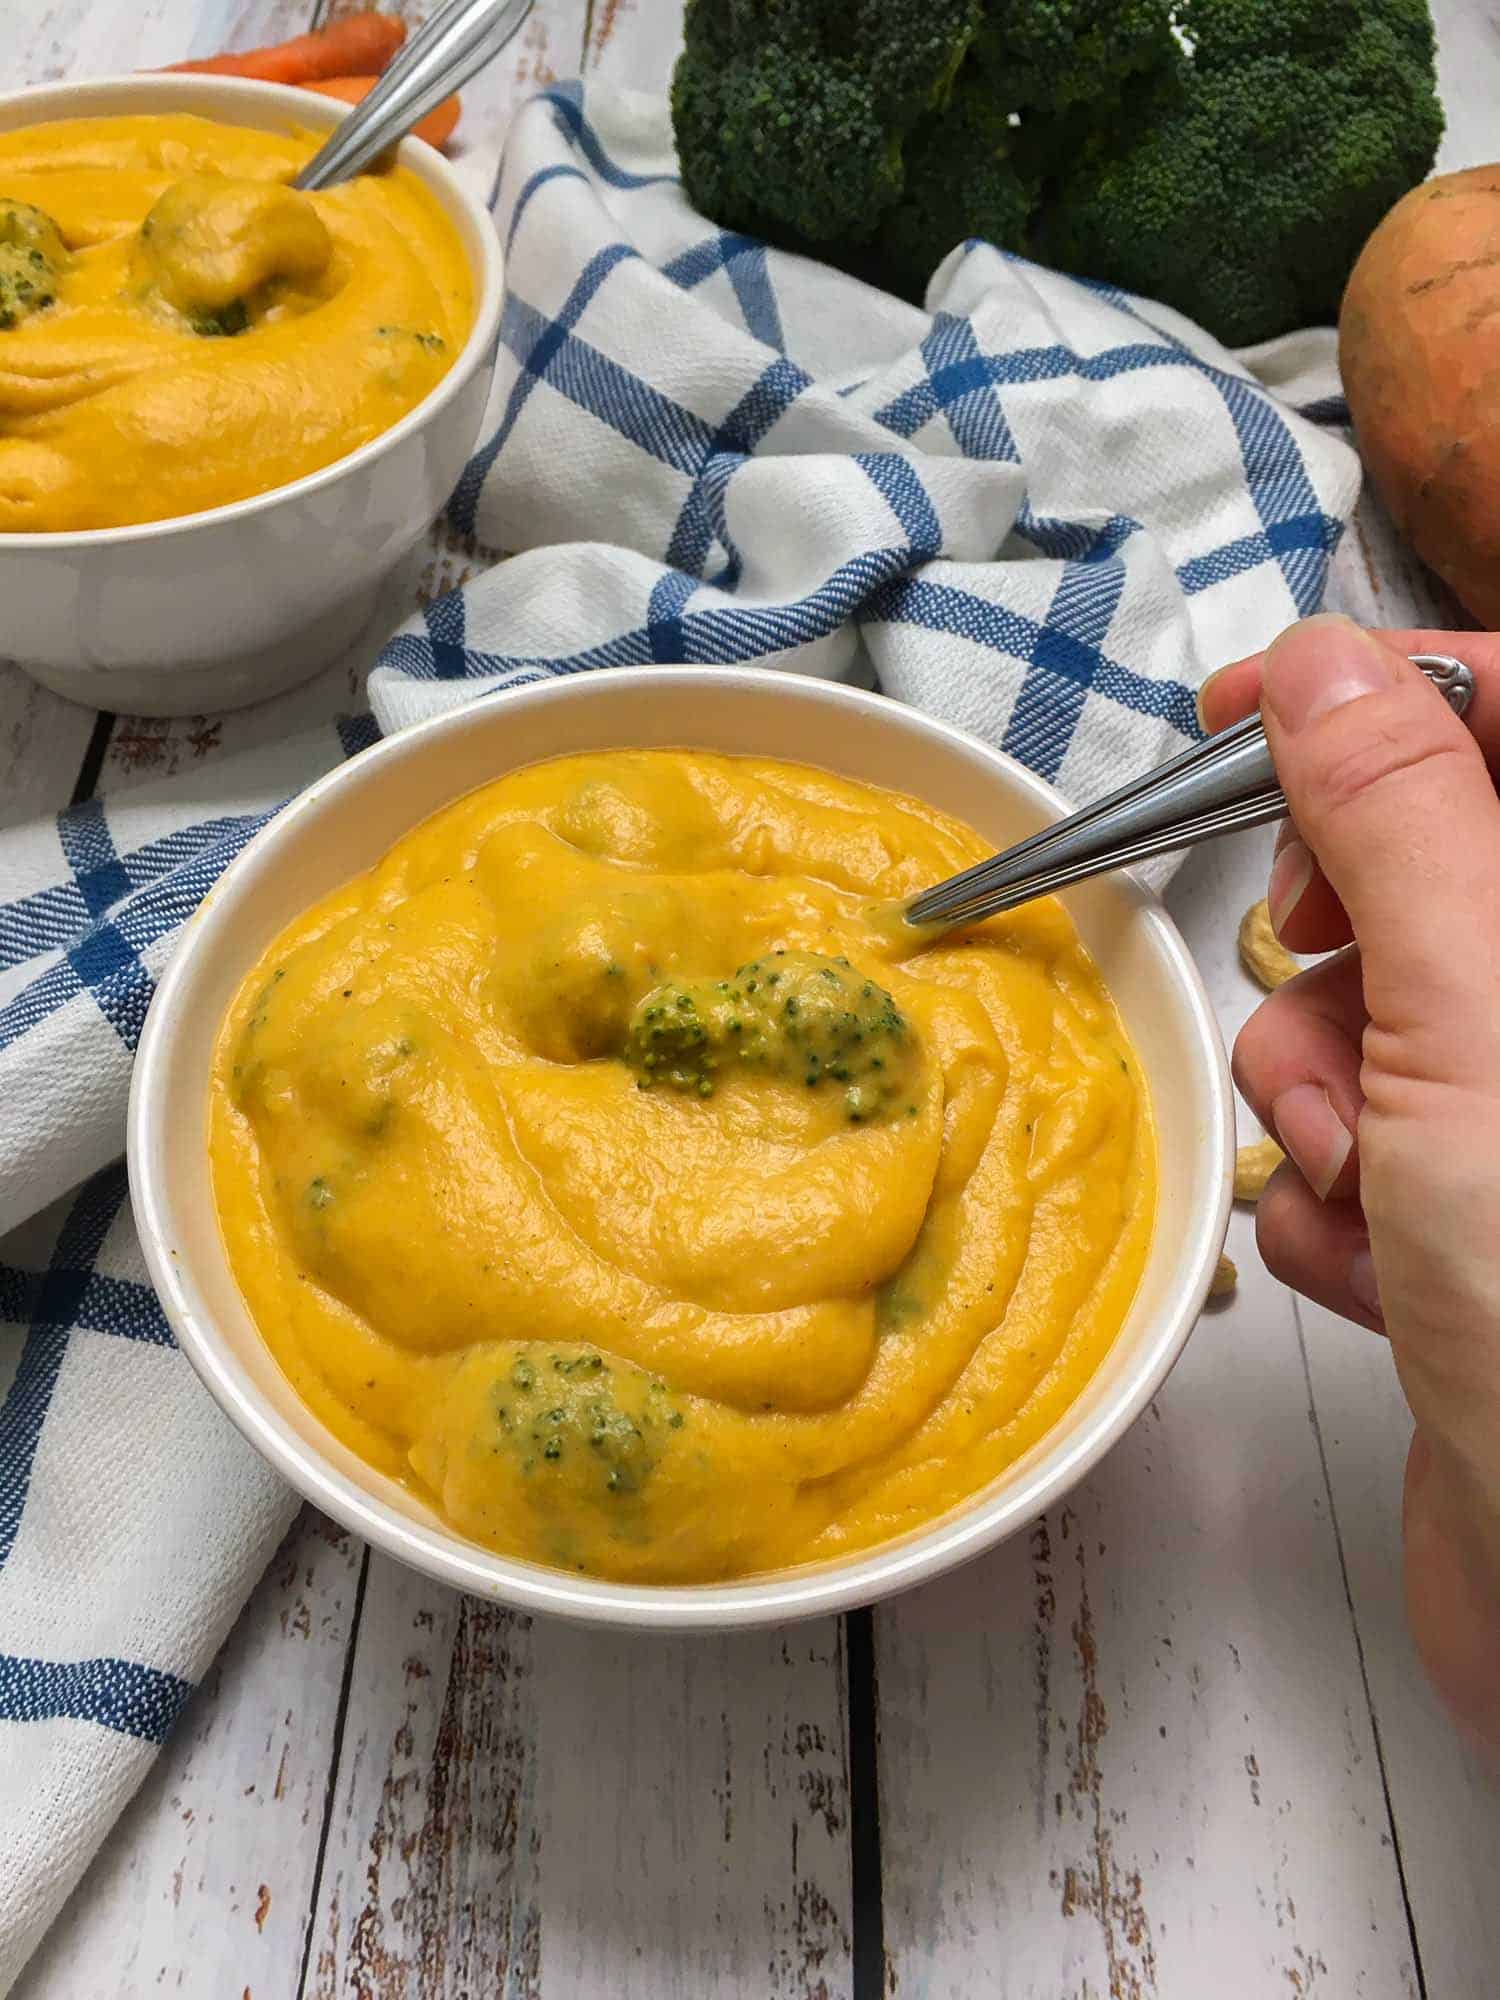 hand holding spoon inside bowl of broccoli cheddar soup